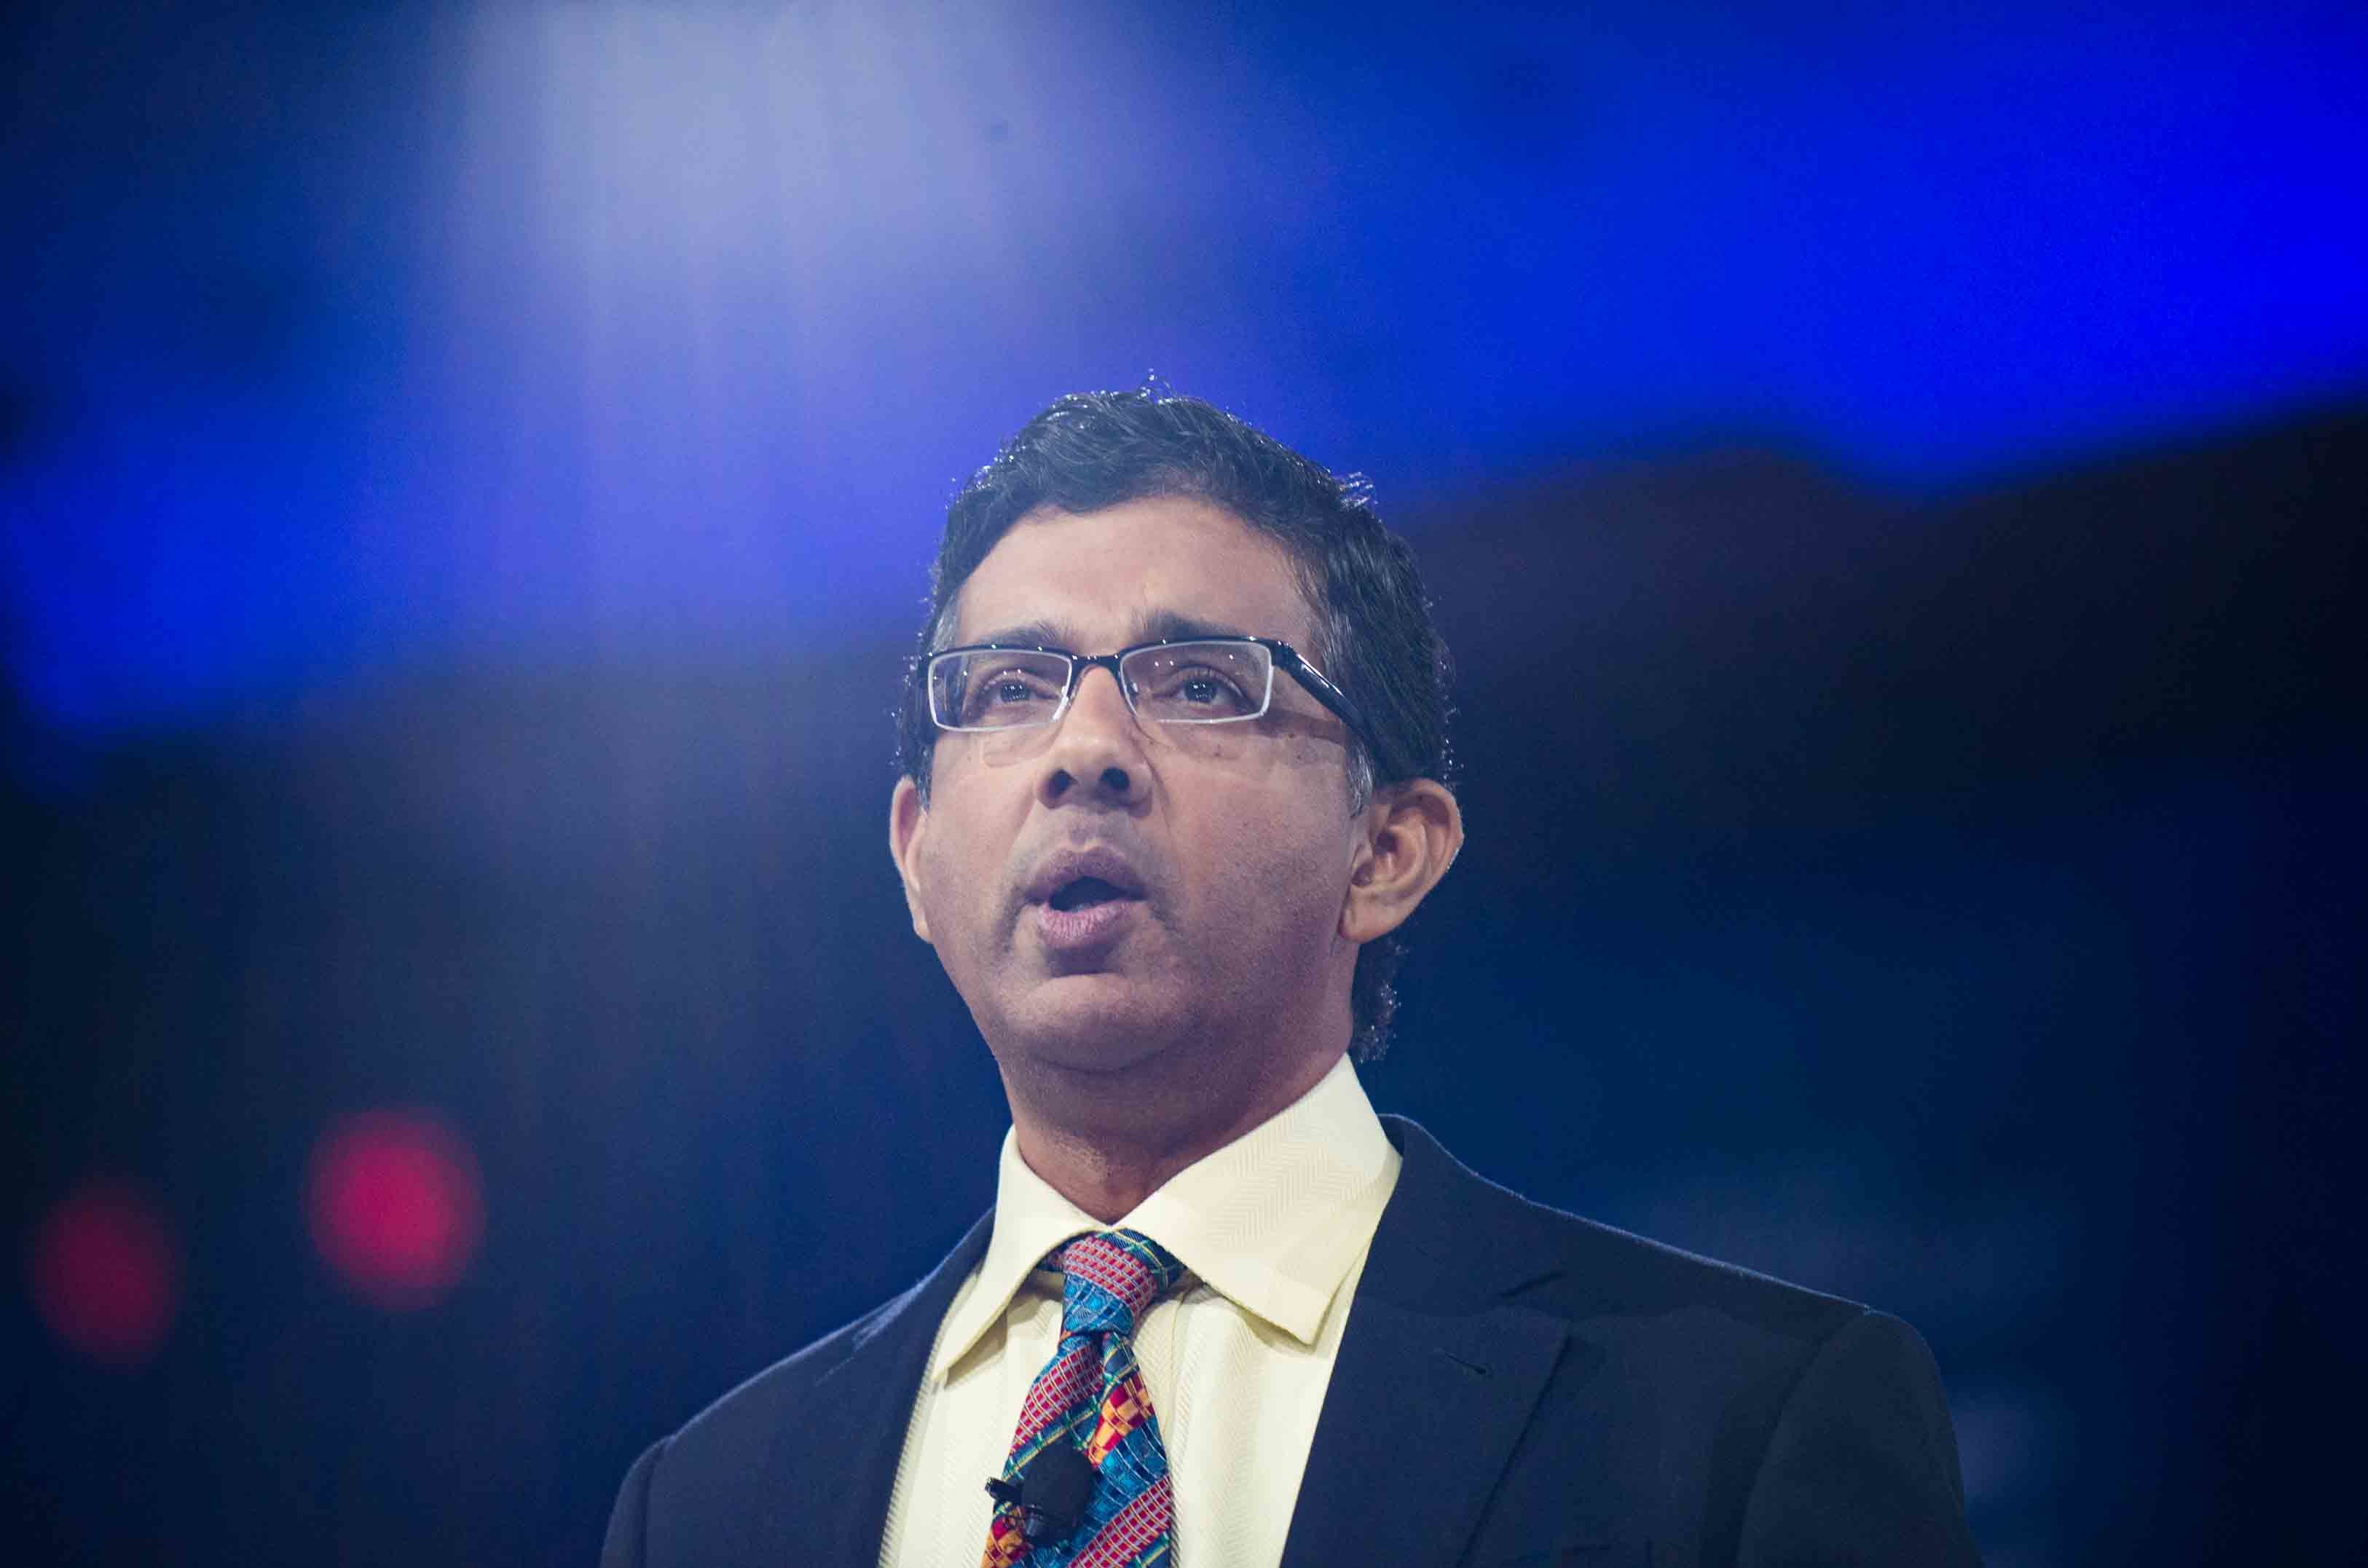 Dinesh D'souza speaking at the CPAC 2016 conference on March 5, 2016, in National Harbor, Maryland. | Source: Getty Images